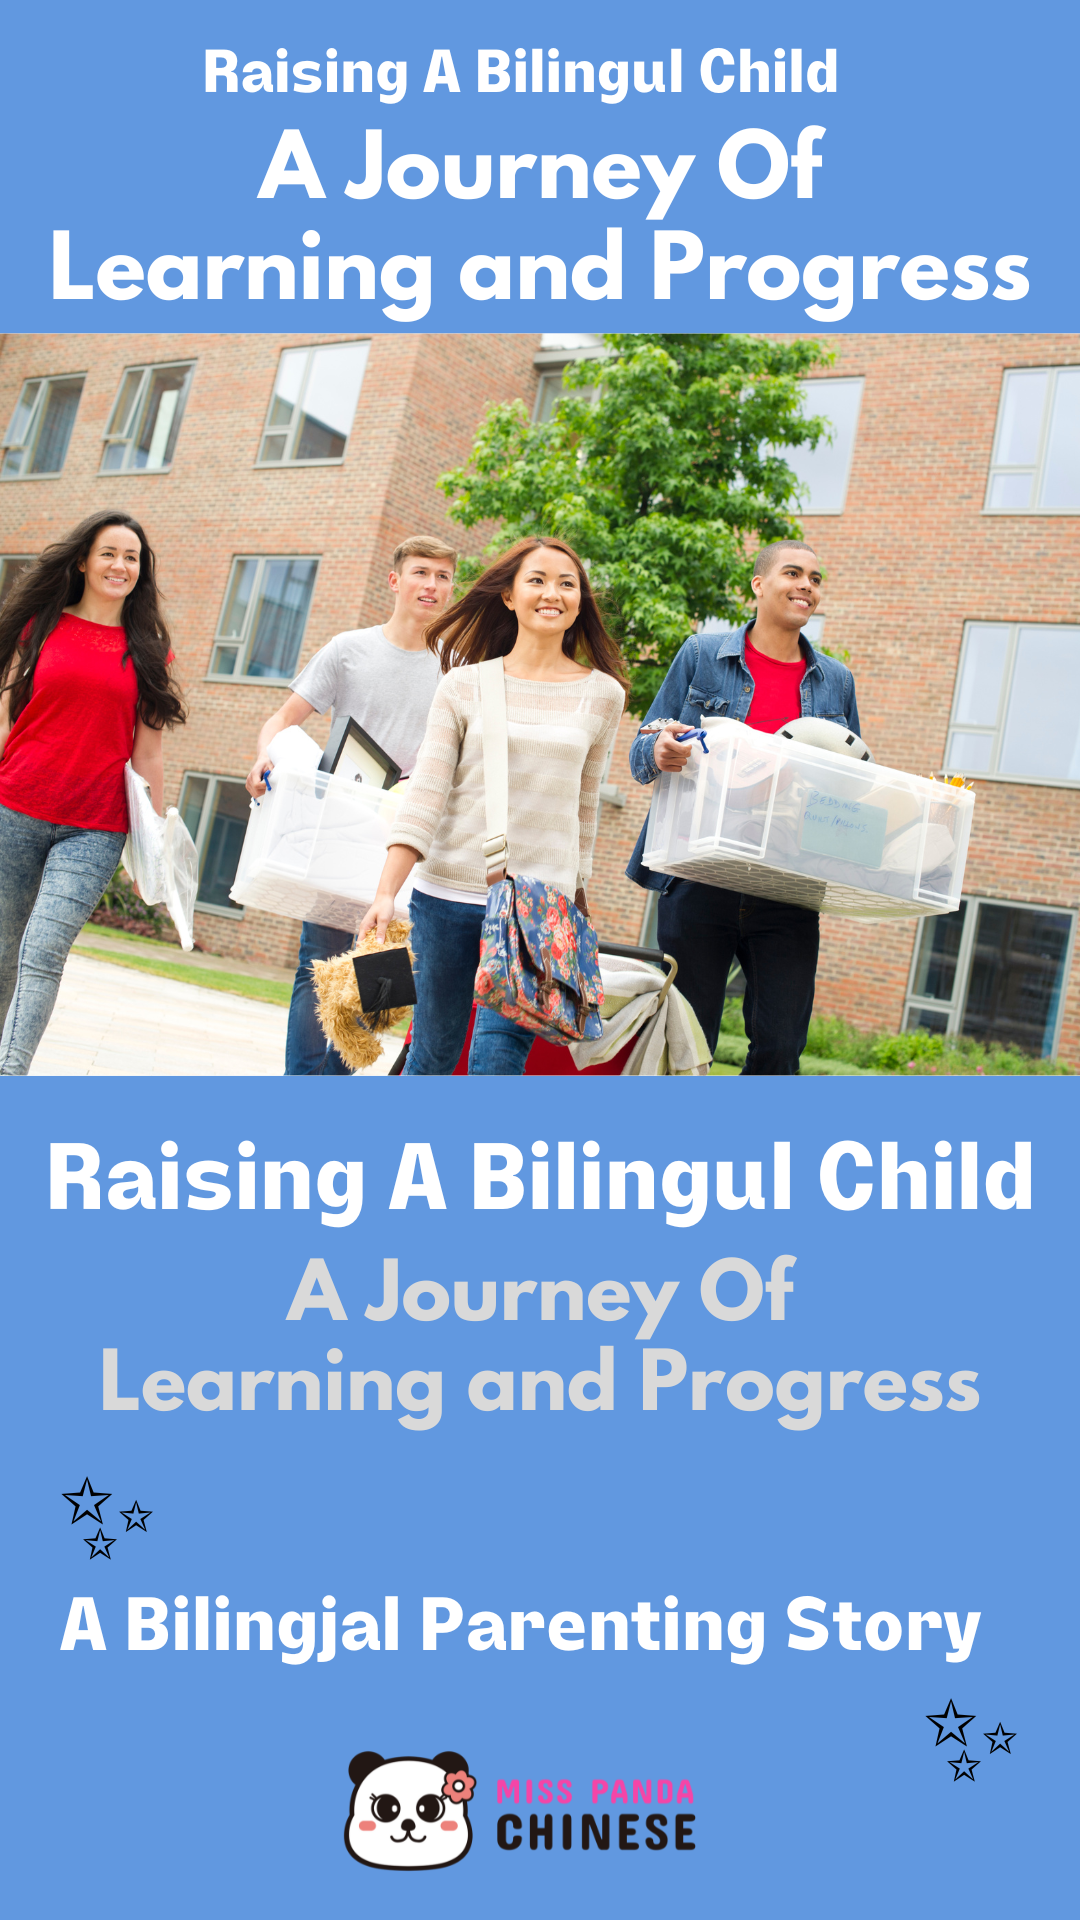 Raising A Bilingual Kids Is A Journey of Learning and Progress | MissPandaChinese.com